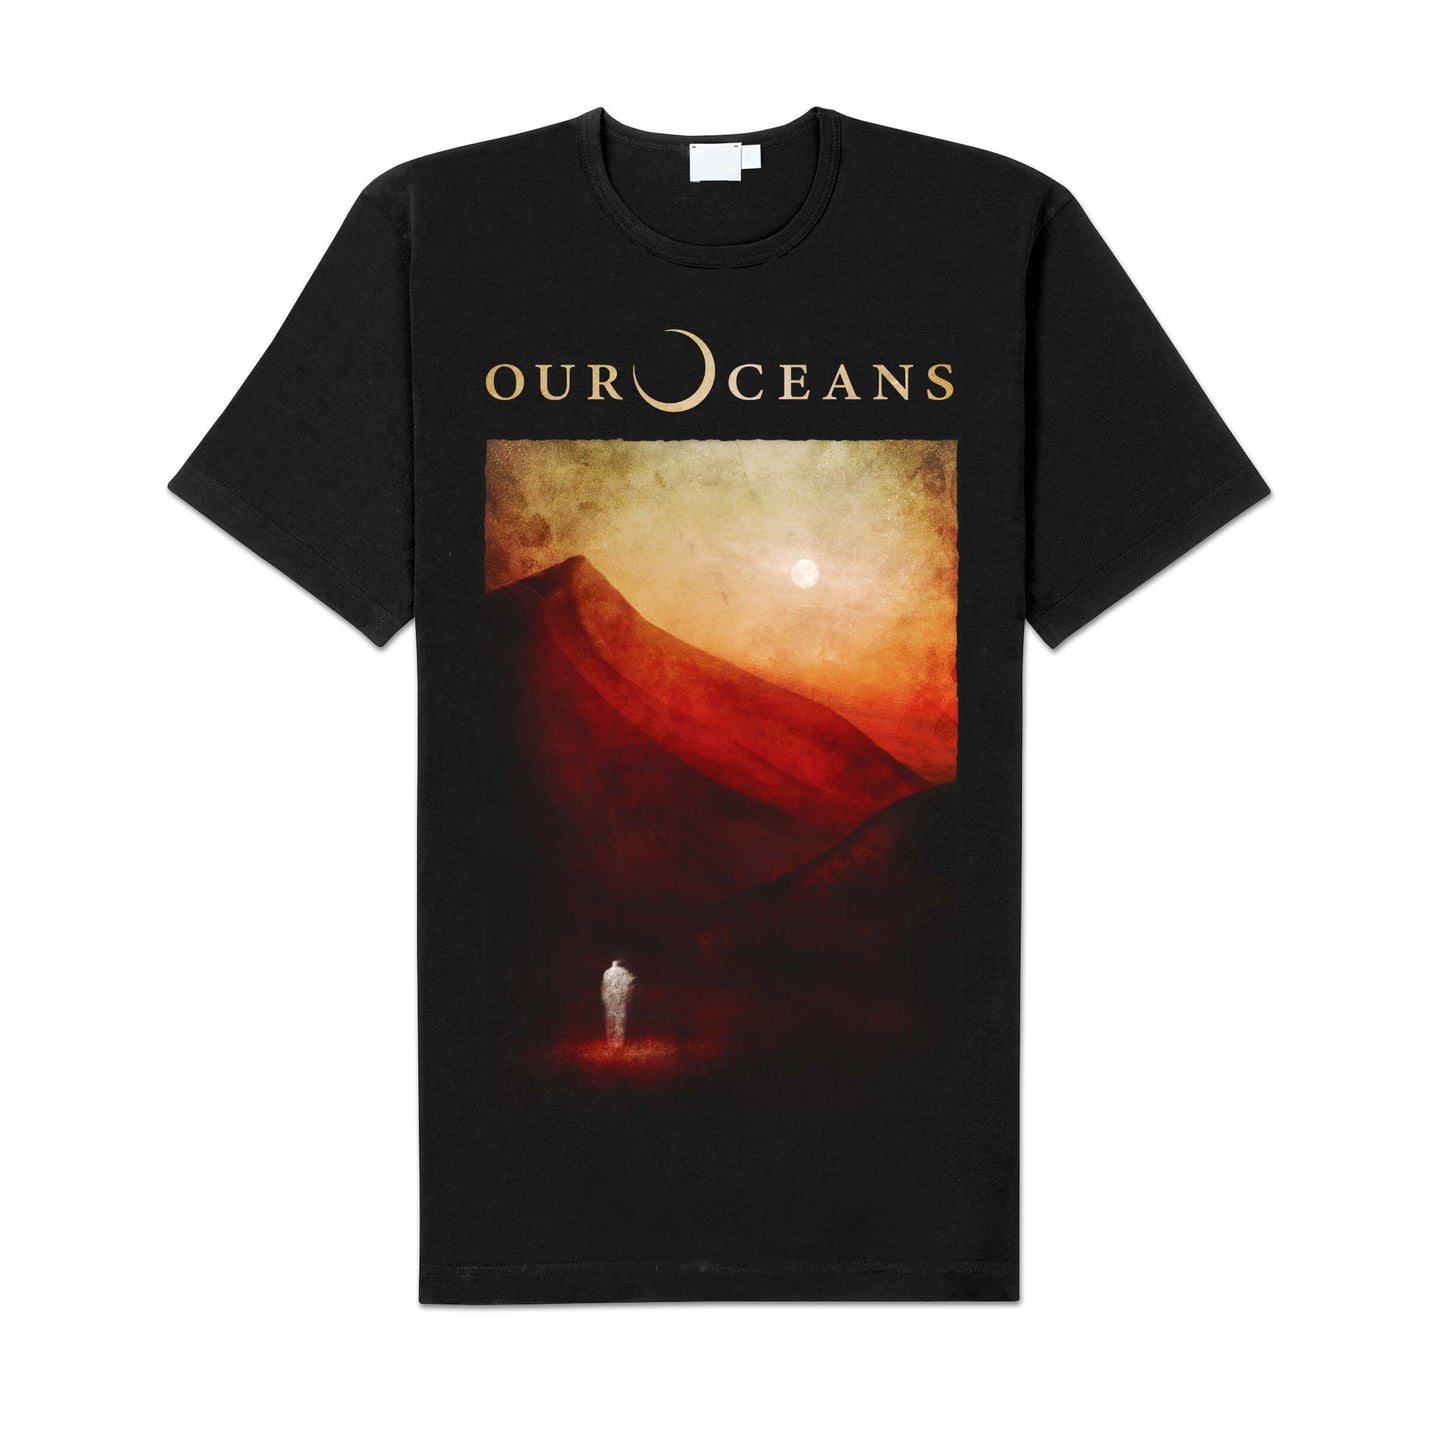 Our Oceans "While Time Disappears" CD-Bundle "Doom"